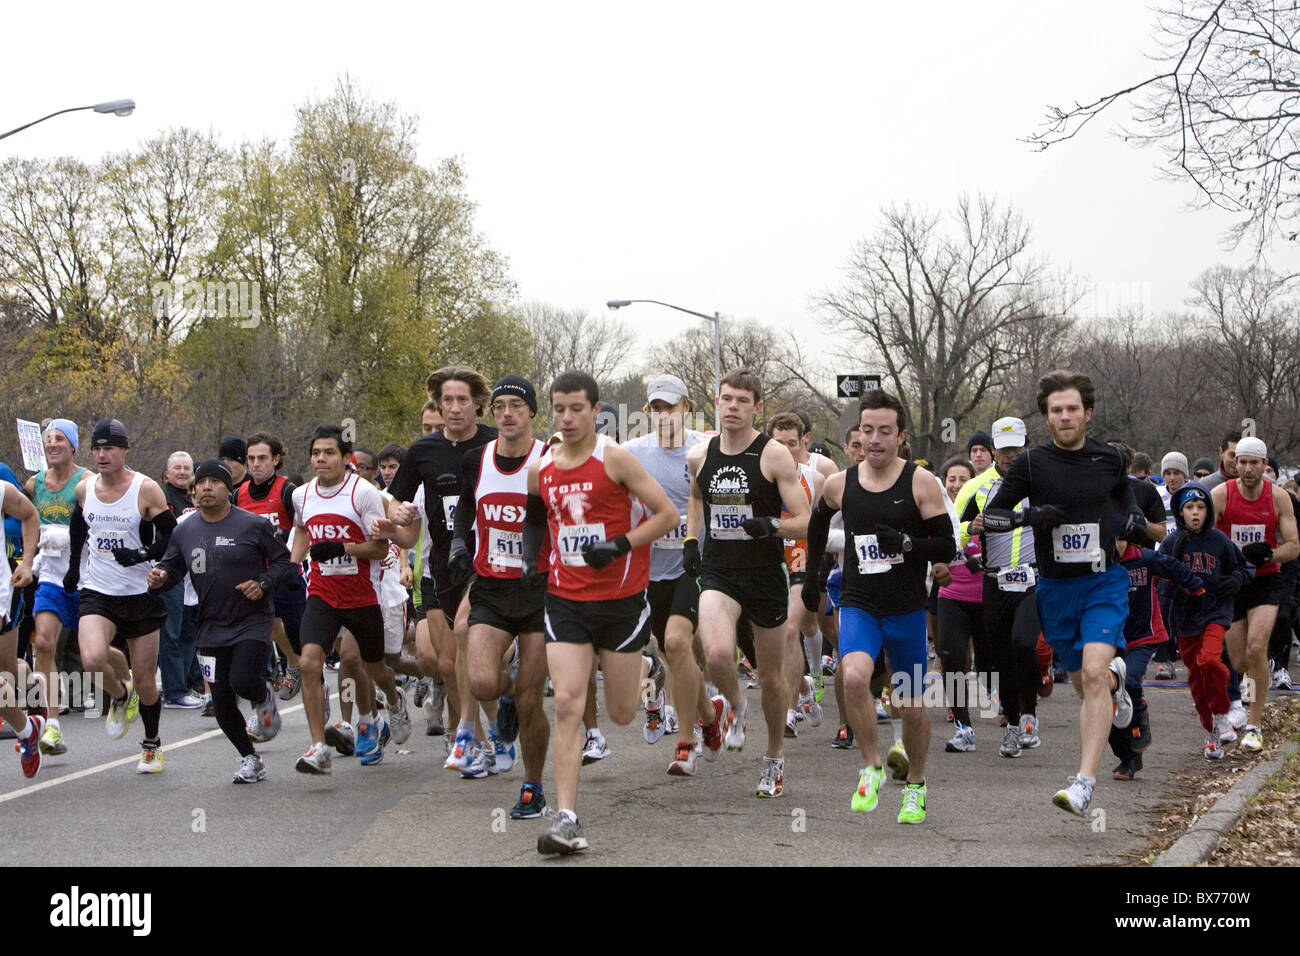 Annual Thanksgiving 'Turkey Trot' 5 mile run in Prospect Park, Brooklyn, New York.  Competitive runners after the race starts Stock Photo